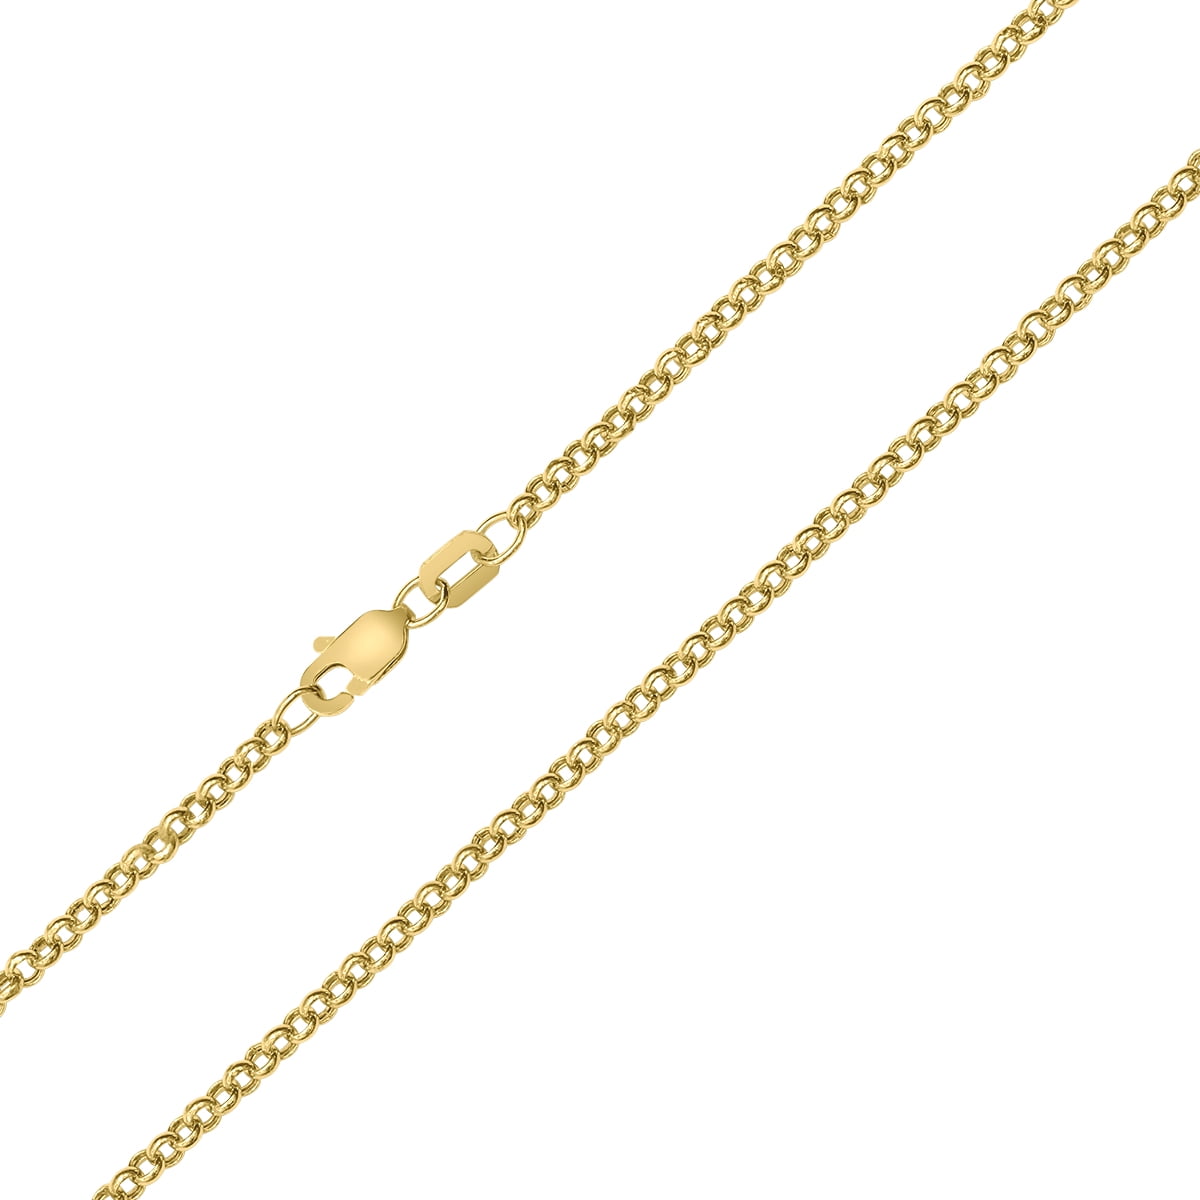 10k Sparkle Cut Rolo Chain Necklace Jewelry Gifts for Women in White Gold Yellow Gold Choice of Lengths 16 18 20 and 1.9mm 2.3mm 